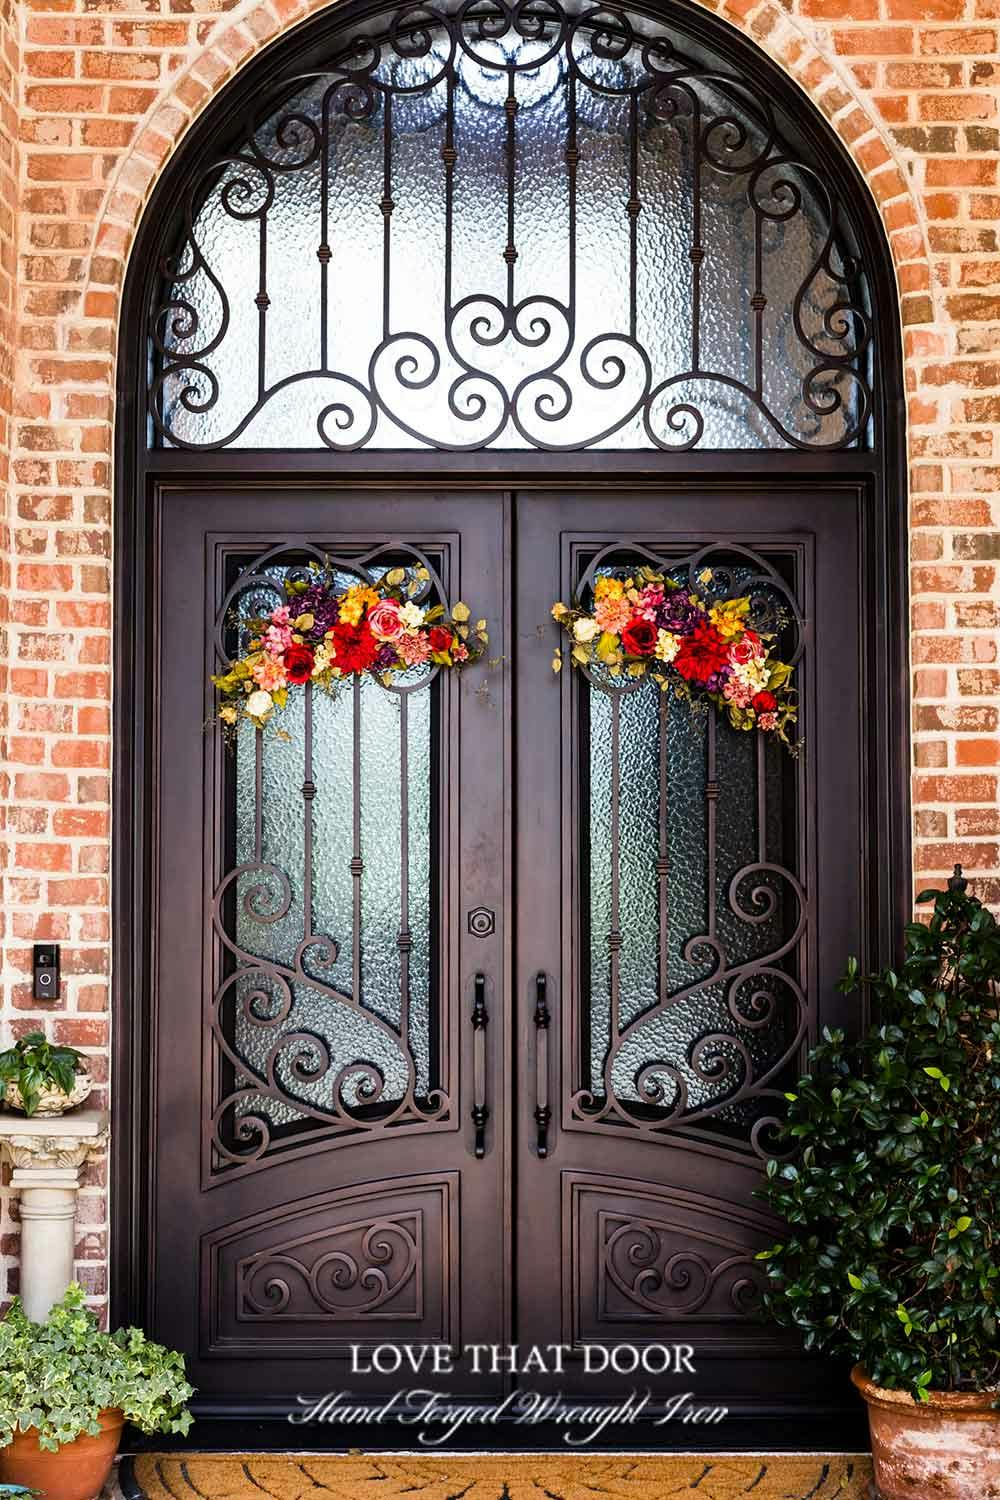 Awe-inspiring iron entryway with transom, creating a grand and welcoming statement.